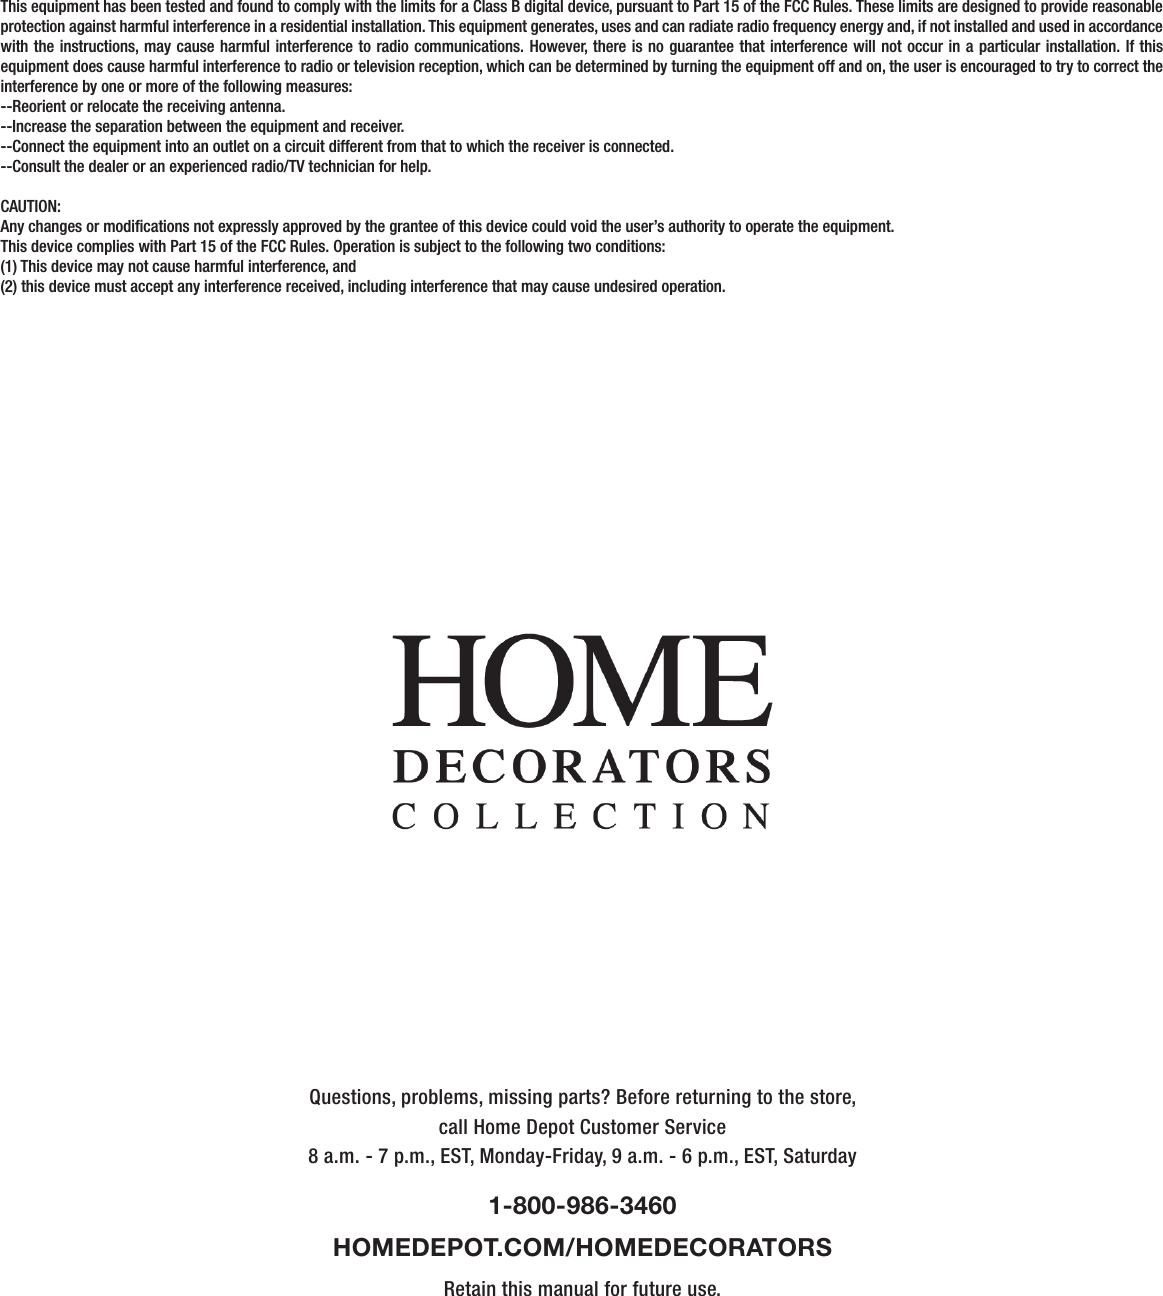 Questions, problems, missing parts? Before returning to the store,call Home Depot Customer Service8 a.m. - 7 p.m., EST, Monday-Friday, 9 a.m. - 6 p.m., EST, Saturday1-800-986-3460HOMEDEPOT.COM/HOMEDECORATORSRetain this manual for future use.This equipment has been tested and found to comply with the limits for a Class B digital device, pursuant to Part 15 of the FCC Rules. These limits are designed to provide reasonable protection against harmful interference in a residential installation. This equipment generates, uses and can radiate radio frequency energy and, if not installed and used in accordance with the instructions, may cause harmful interference to radio communications. However, there is no guarantee that interference will not occur in a particular installation. If this equipment does cause harmful interference to radio or television reception, which can be determined by turning the equipment off and on, the user is encouraged to try to correct the interference by one or more of the following measures:--Reorient or relocate the receiving antenna.--Increase the separation between the equipment and receiver.--Connect the equipment into an outlet on a circuit different from that to which the receiver is connected.--Consult the dealer or an experienced radio/TV technician for help.CAUTION:Any changes or modications not expressly approved by the grantee of this device could void the user’s authority to operate the equipment.This device complies with Part 15 of the FCC Rules. Operation is subject to the following two conditions:(1) This device may not cause harmful interference, and(2) this device must accept any interference received, including interference that may cause undesired operation.      